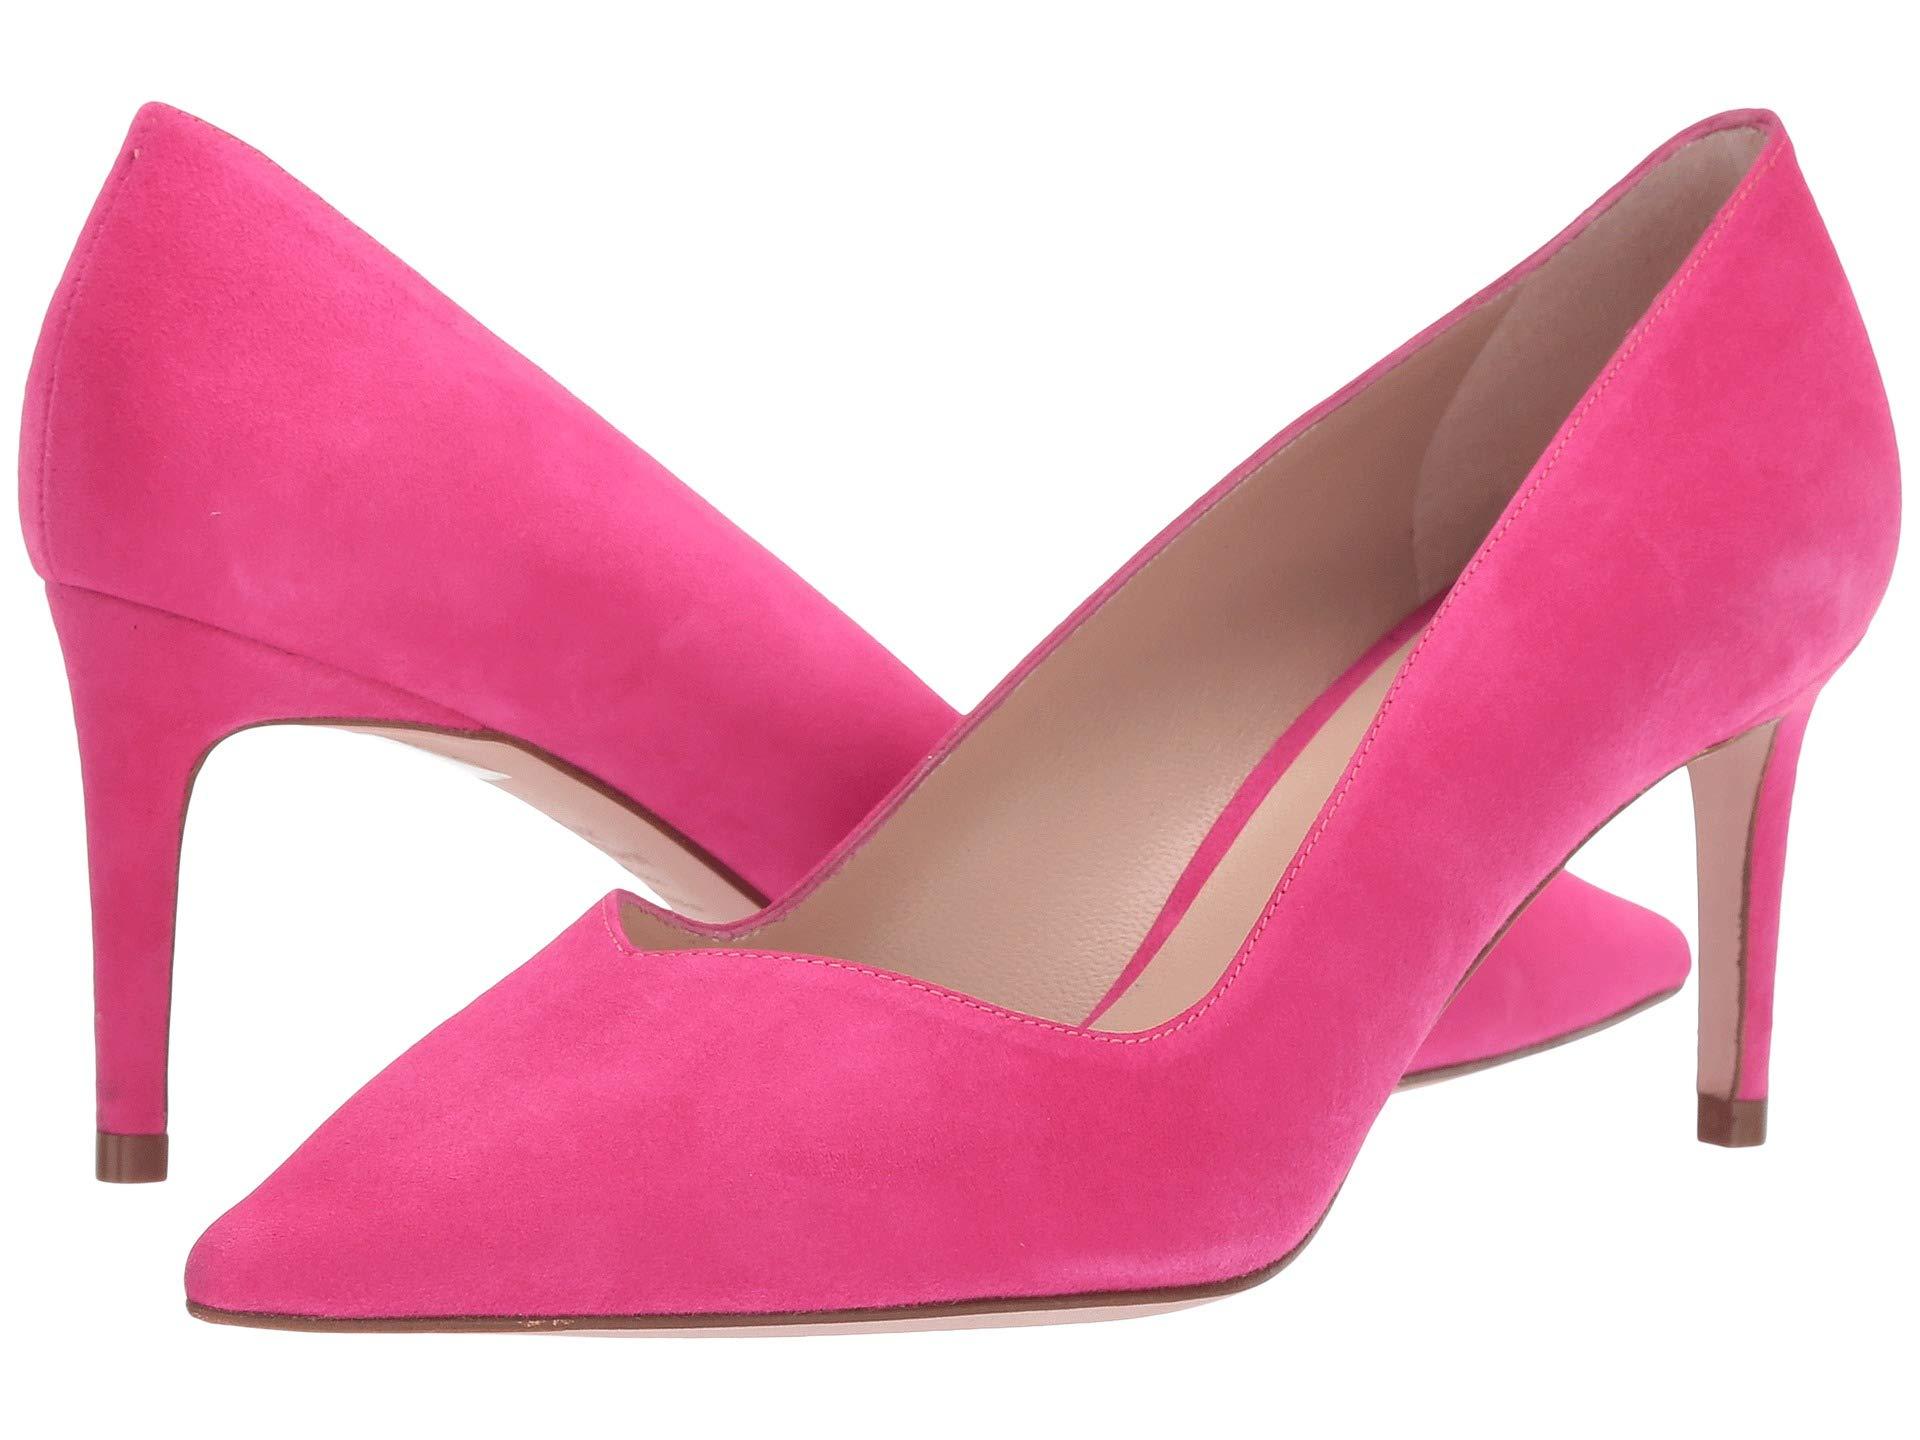 Stuart Weitzman Leather Anny 70mm Pointy Toe Pump in Pink - Lyst